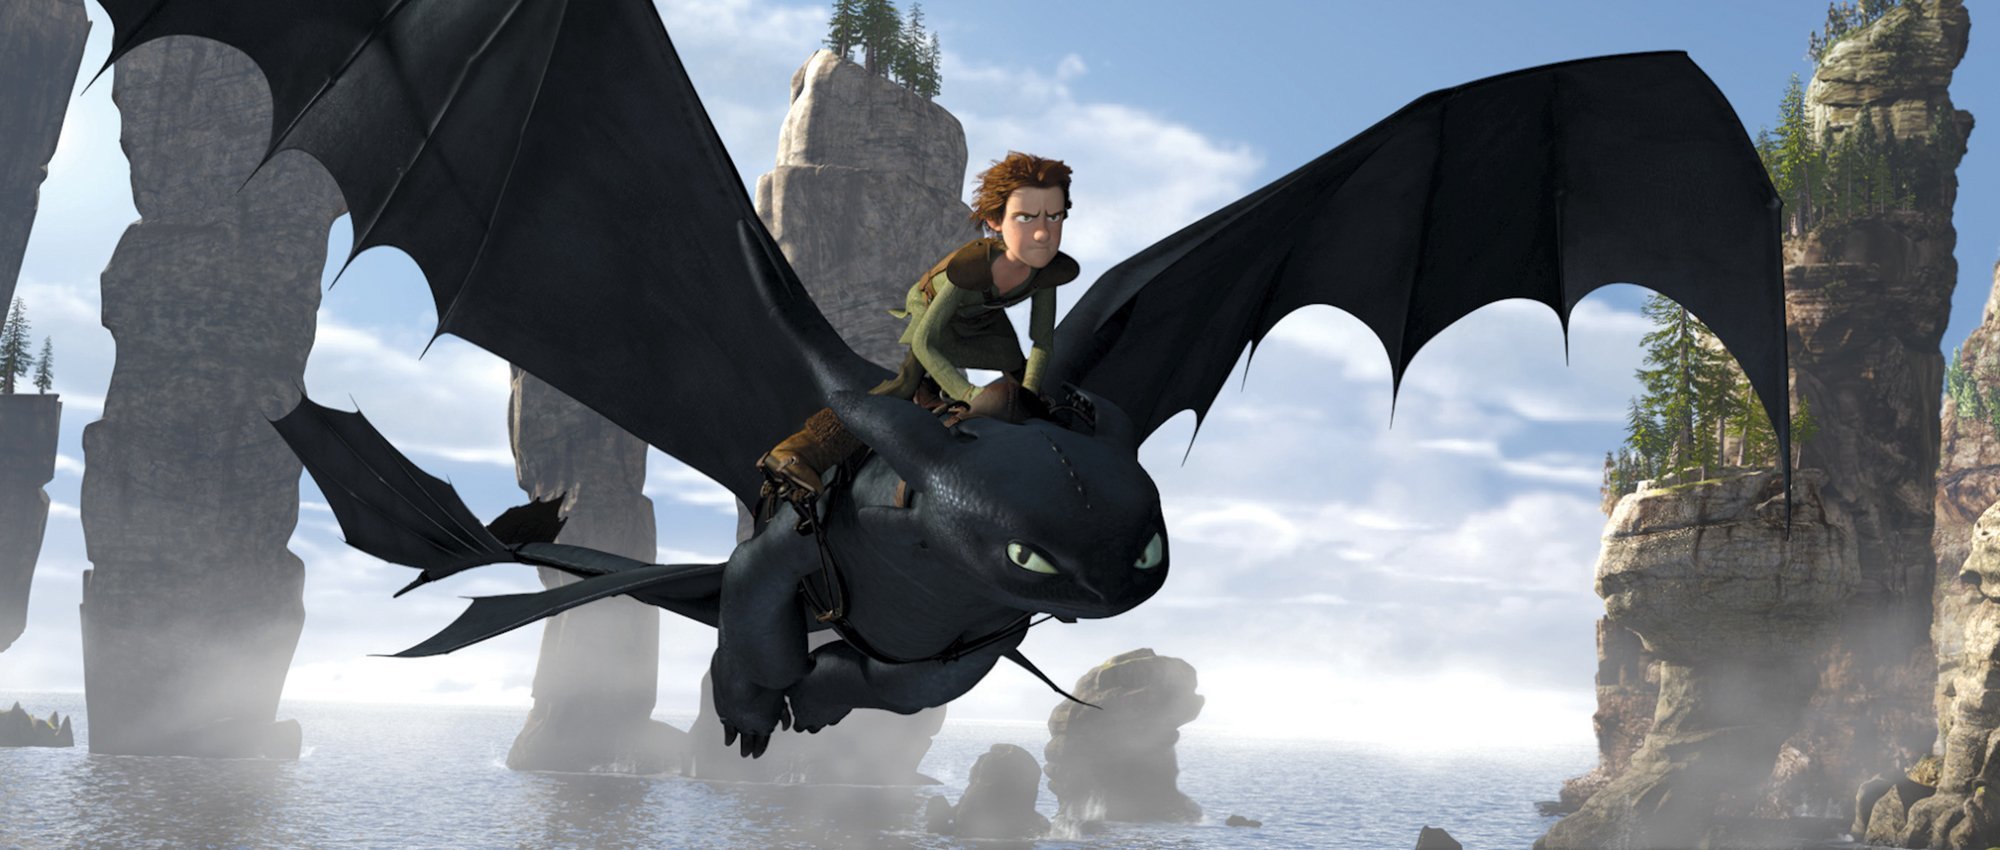 how to train your dragon wallpaper toothless 5 - High Definition ...